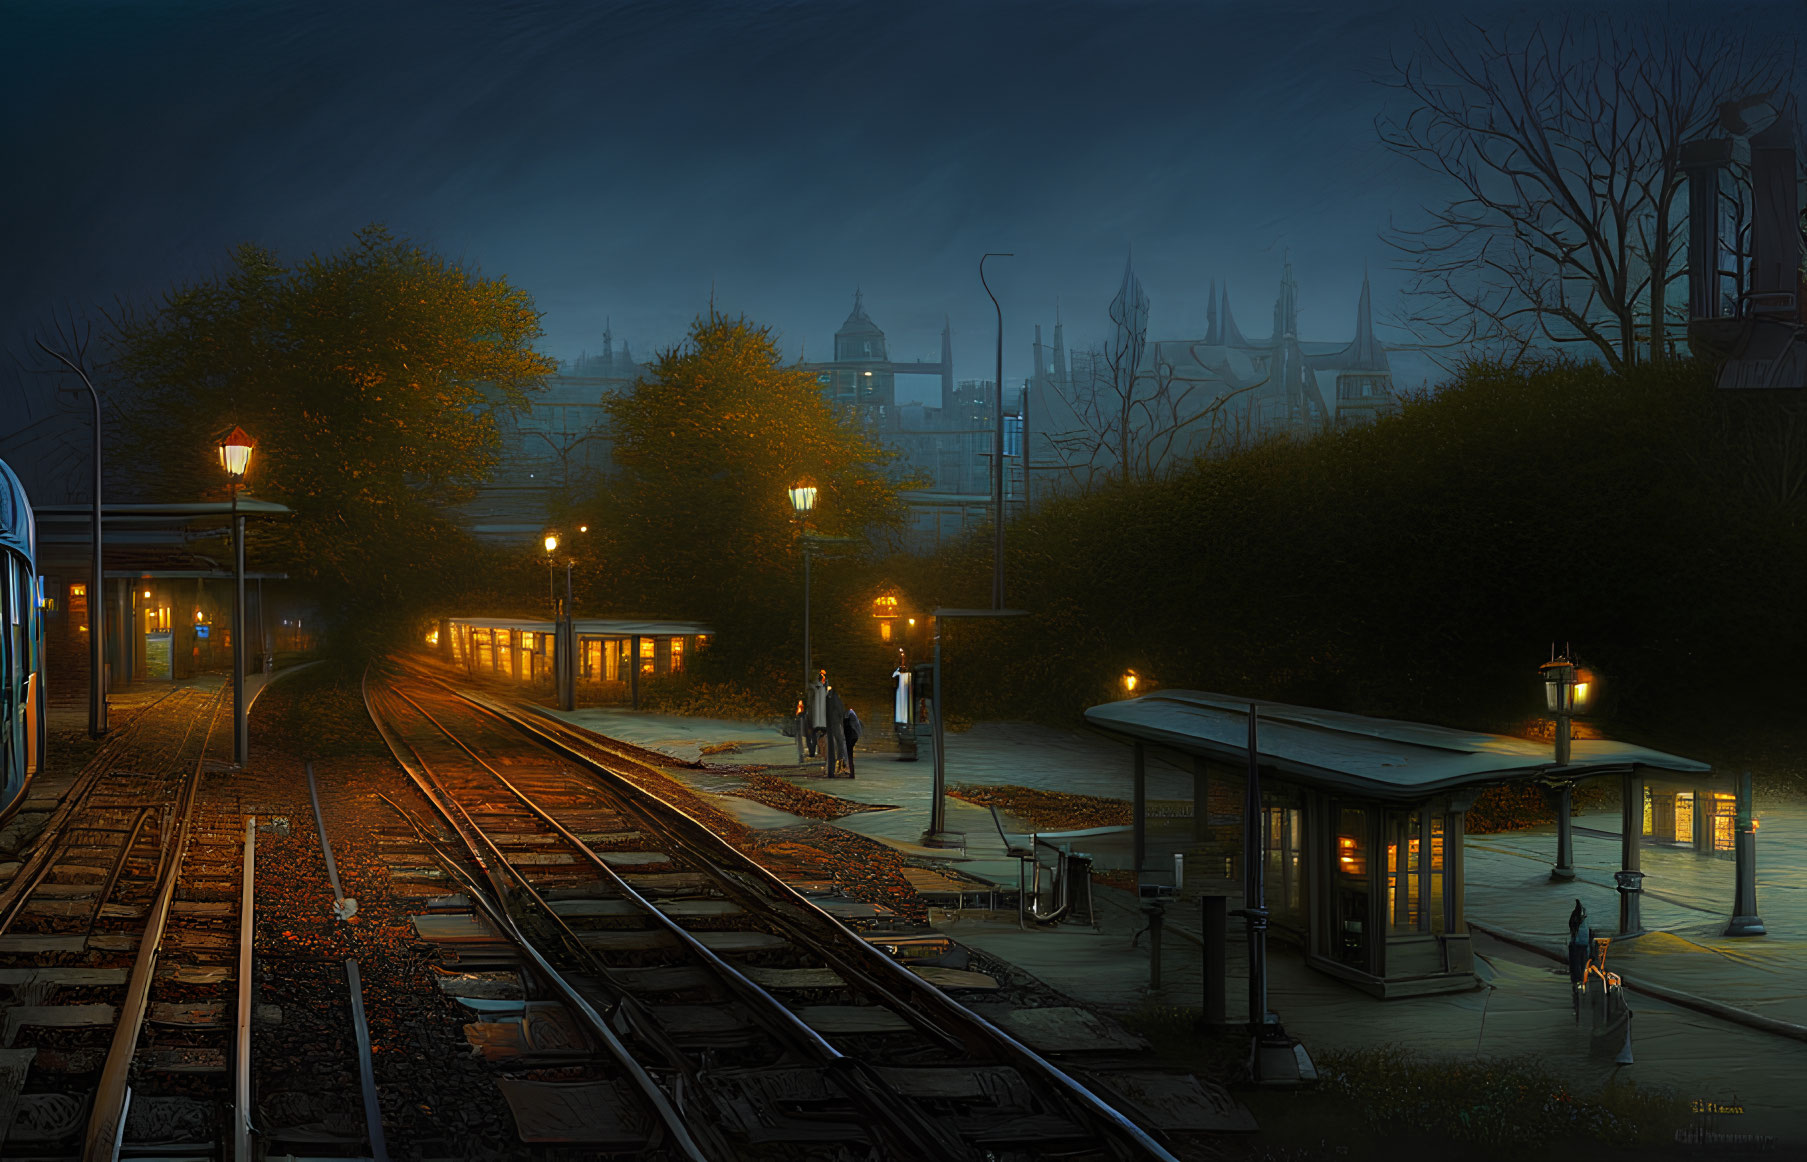 Quiet train station scene with warm lights, passengers, and misty cityscape